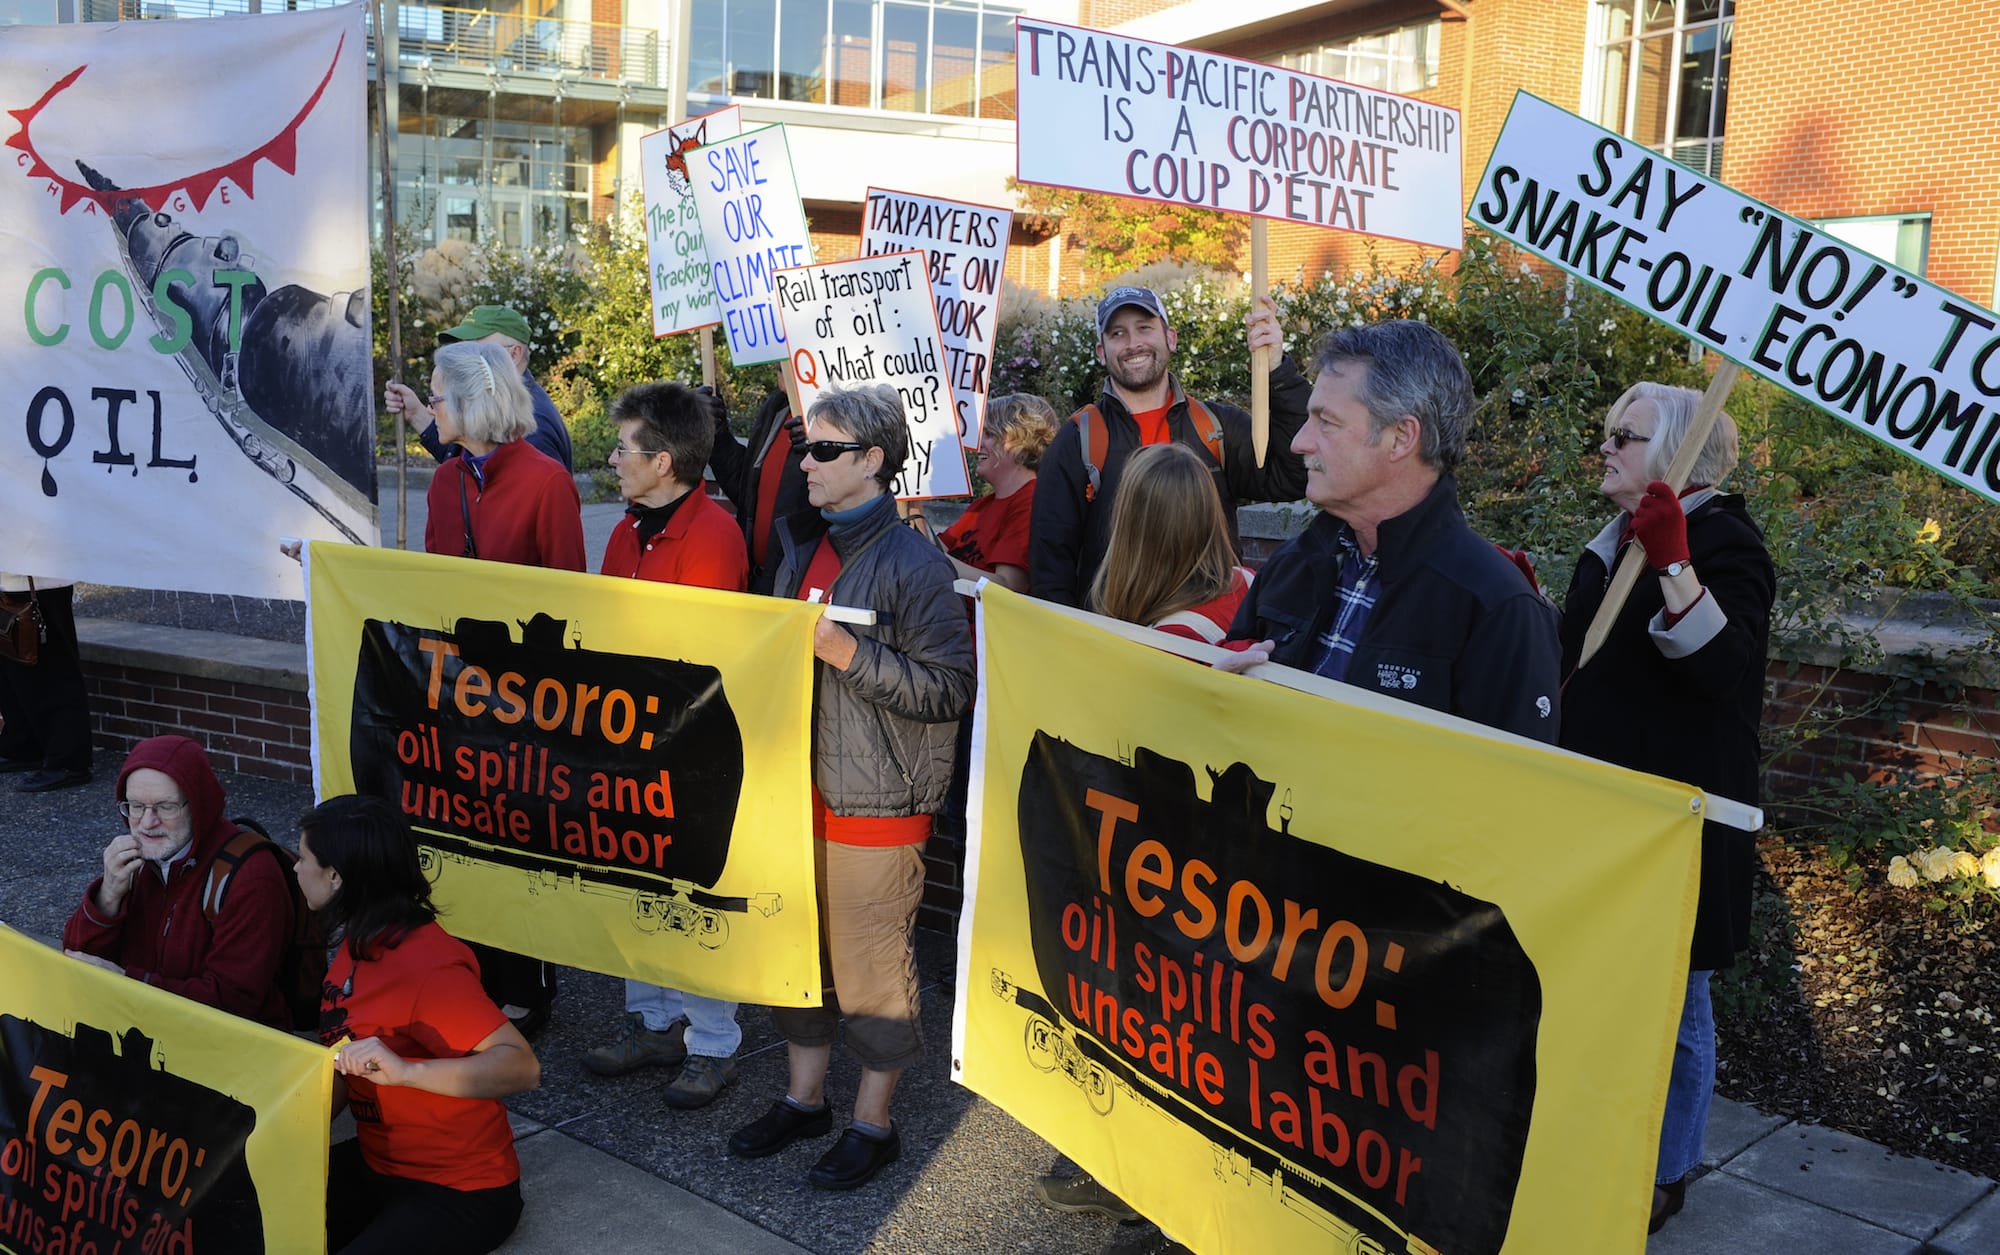 Opponents of the proposed oil terminal at the Port of Vancouver have staged public protests and have urged the Vancouver City Council to take a stand against the Tesoro-Savage proposal.